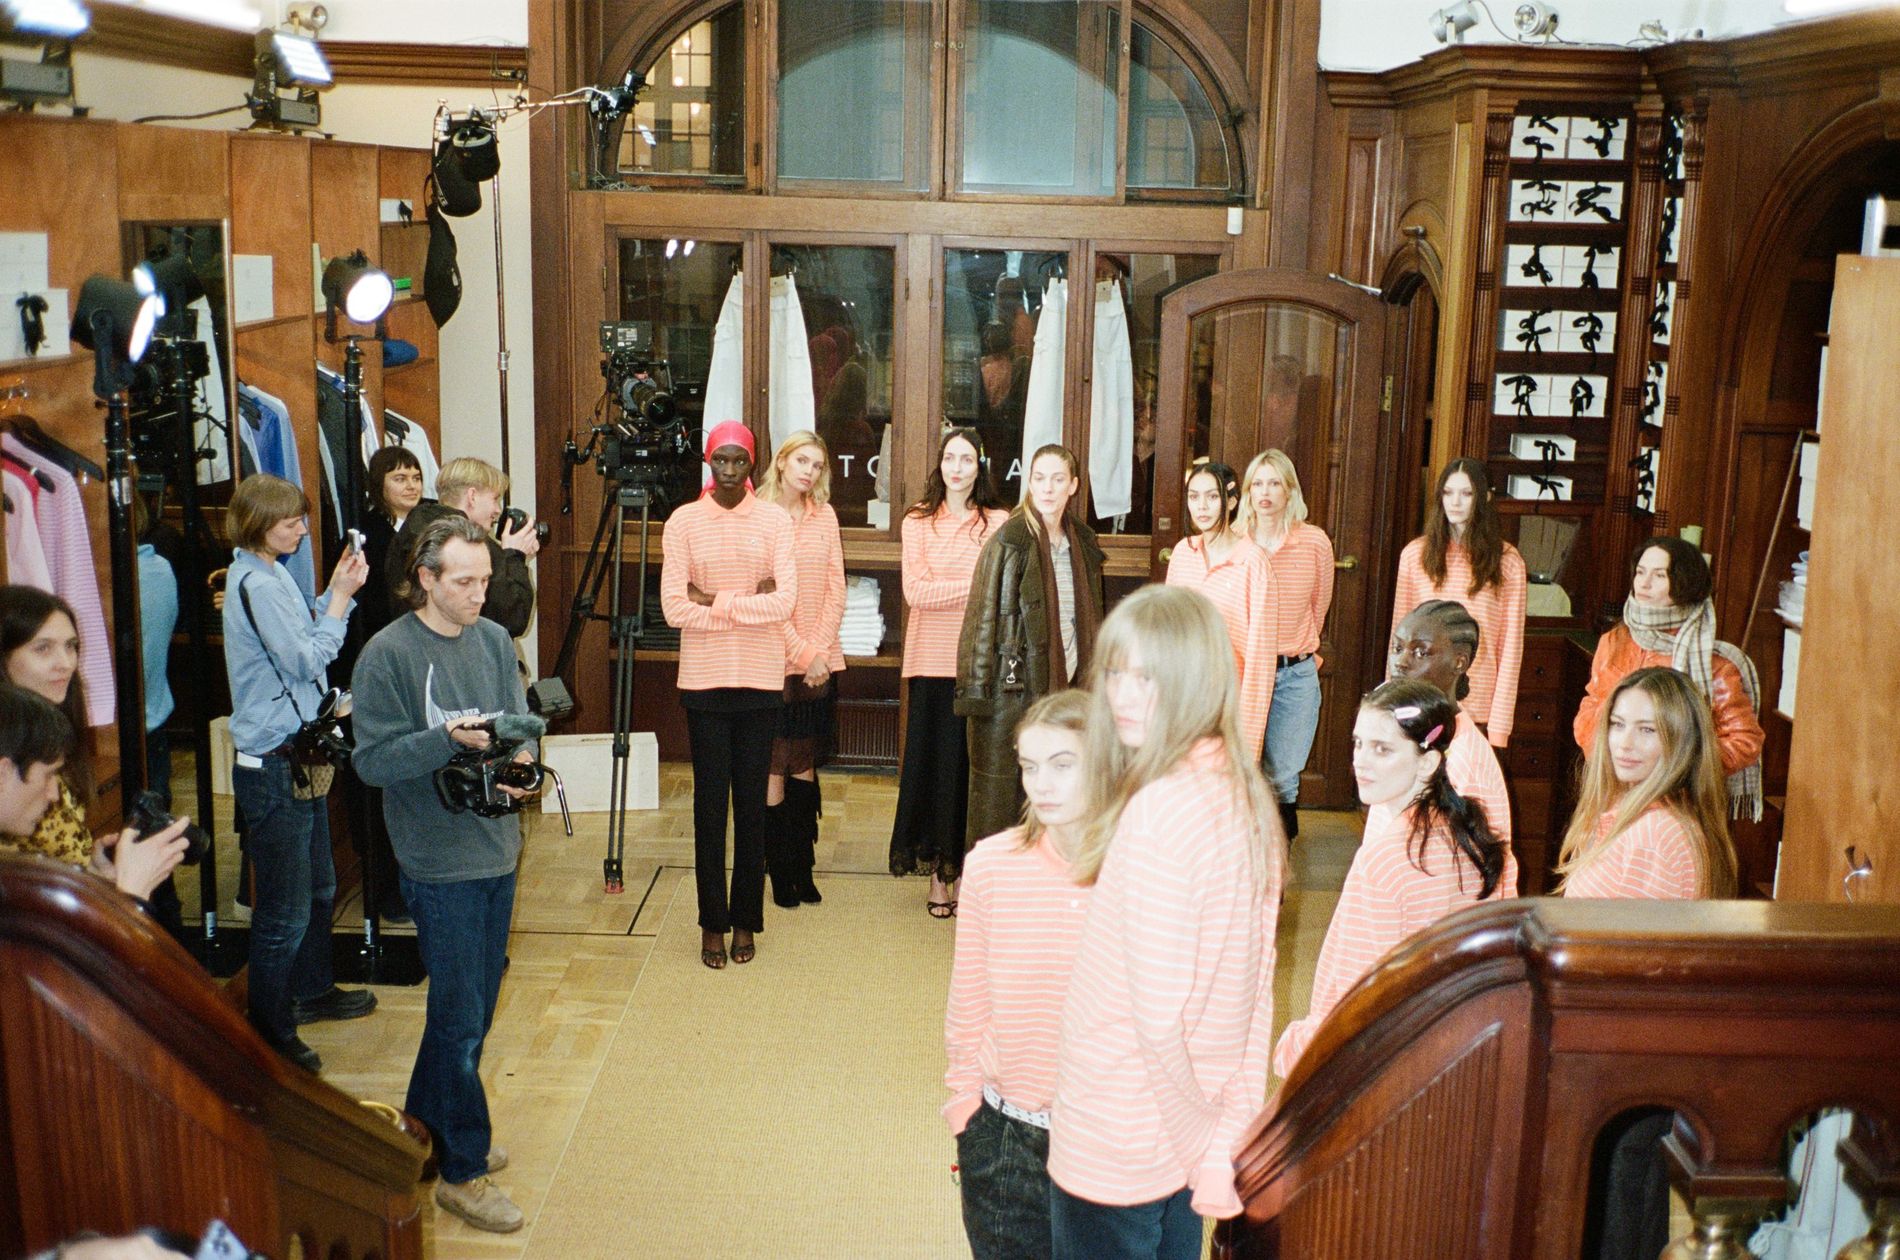 The rehearsal brief of the Saks Potts show